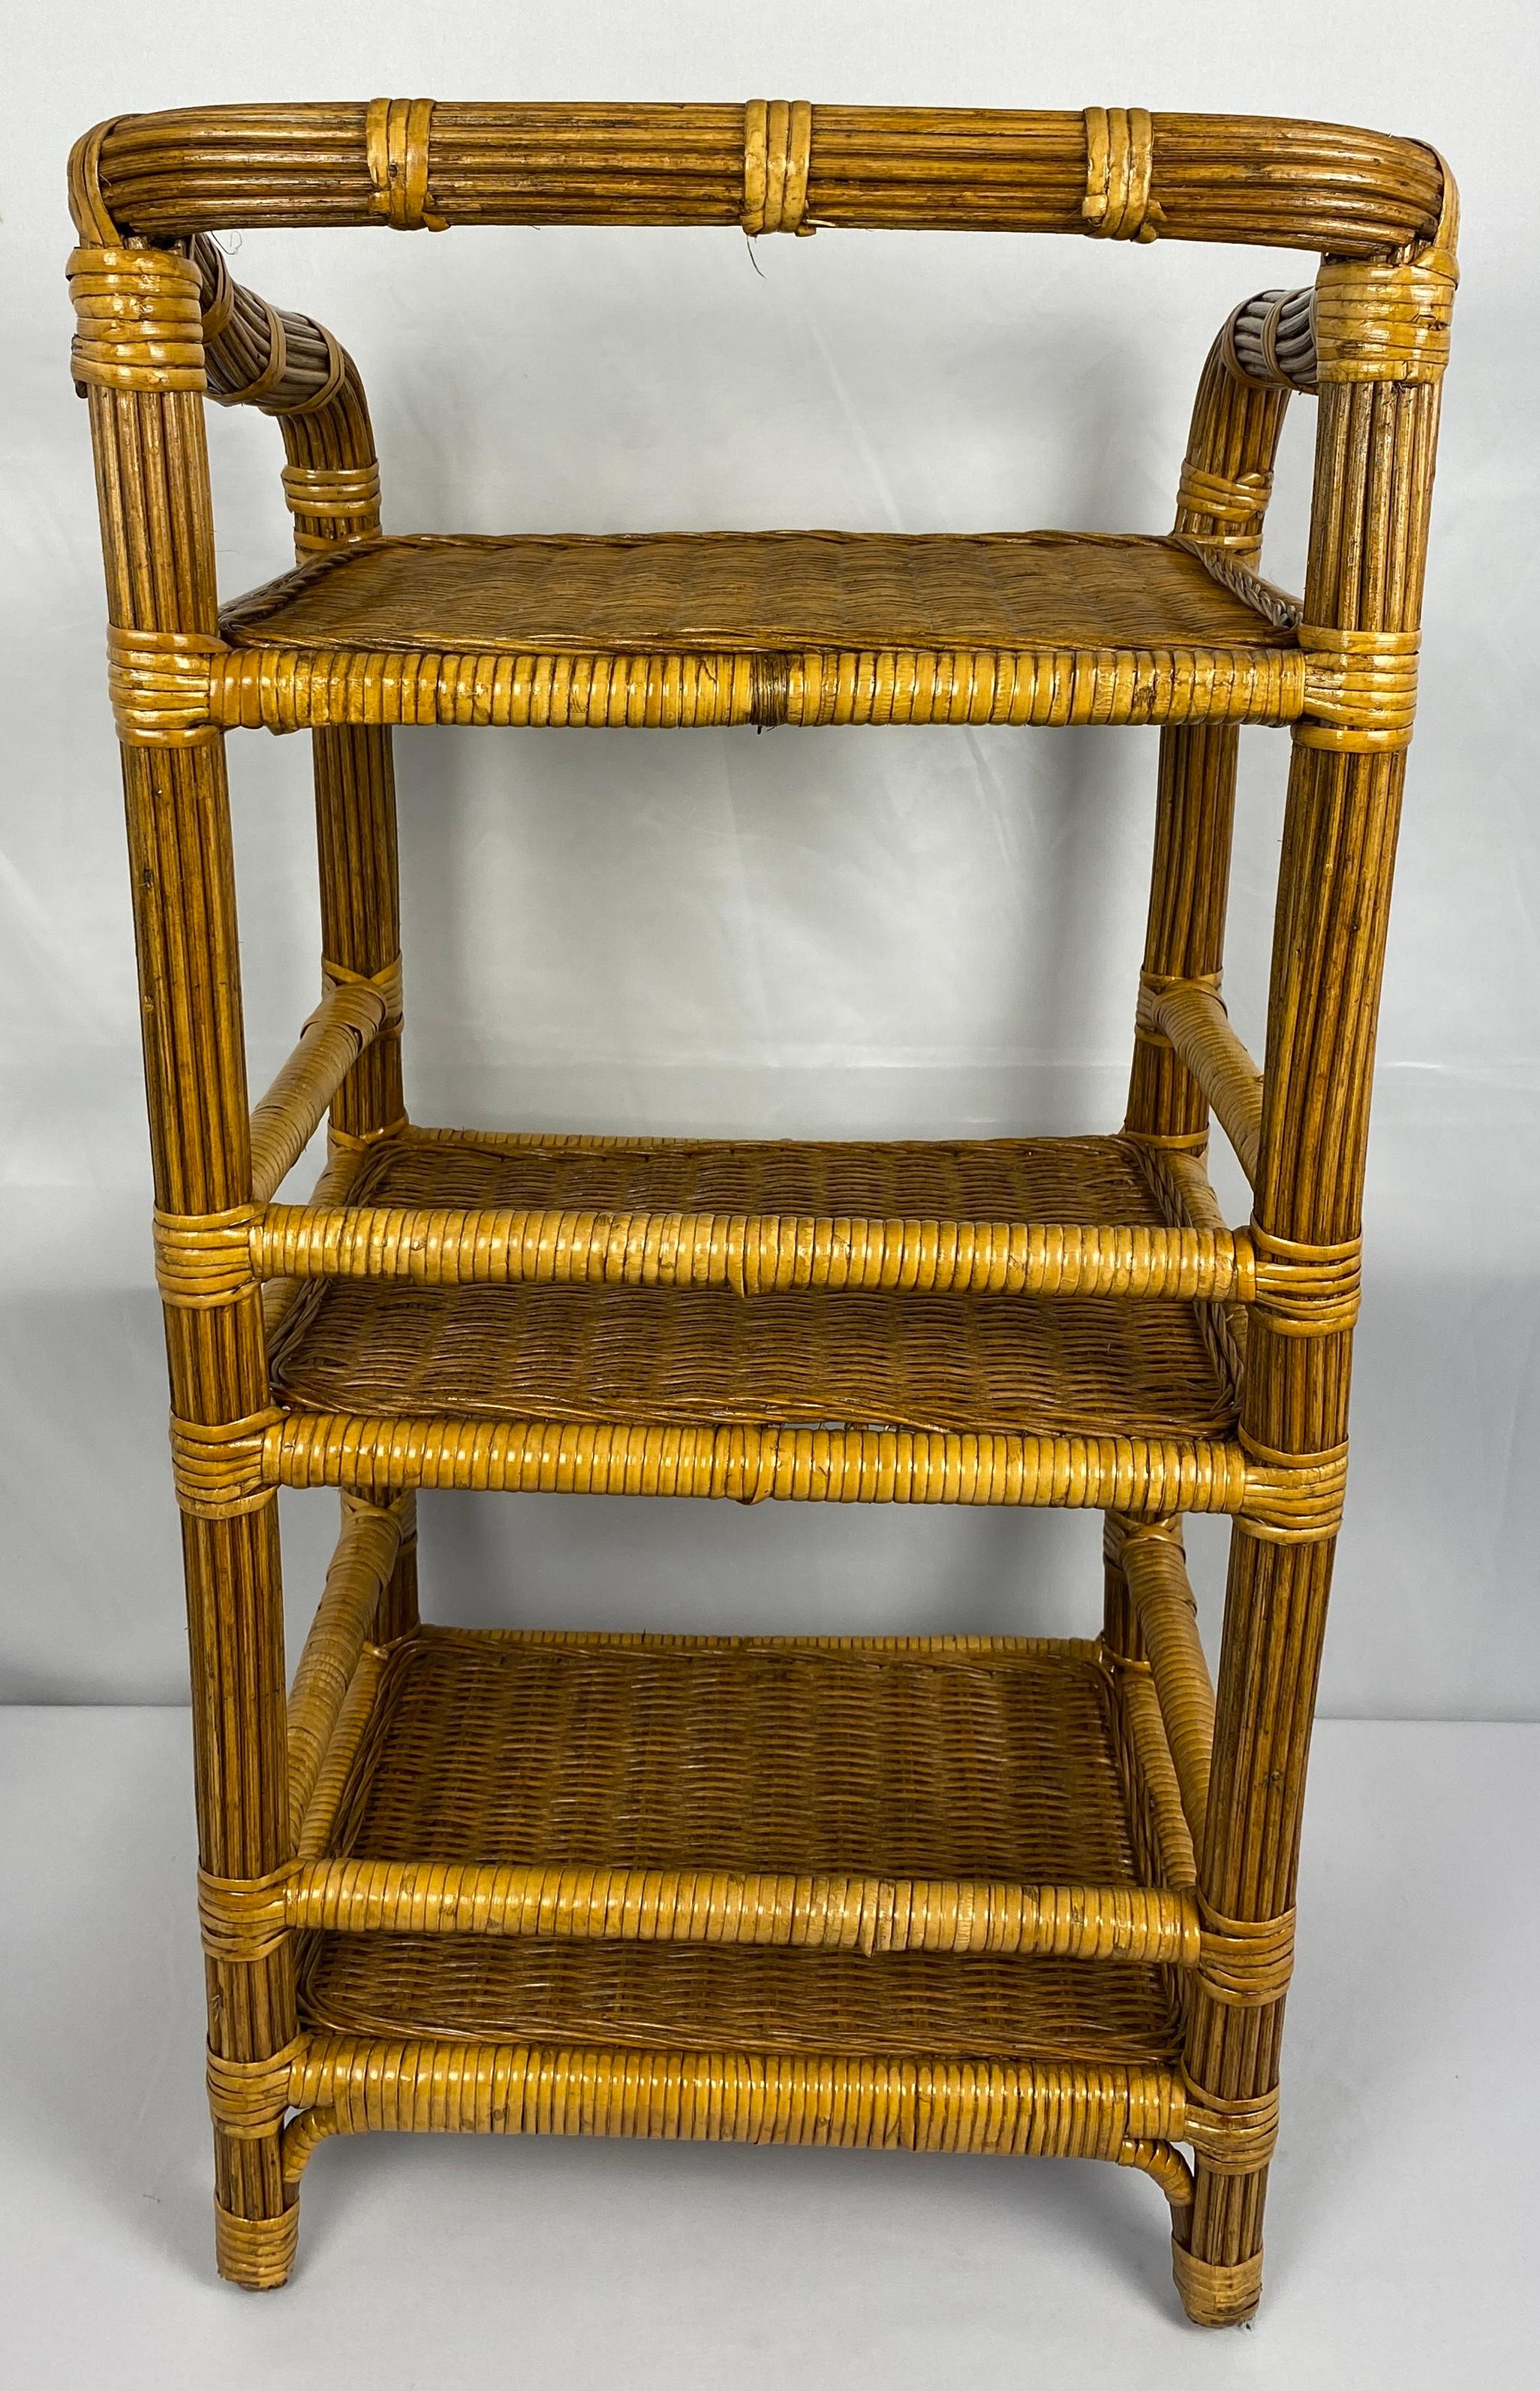 20th Century Vintage Rattan Side Table with 3 Shelves For Sale